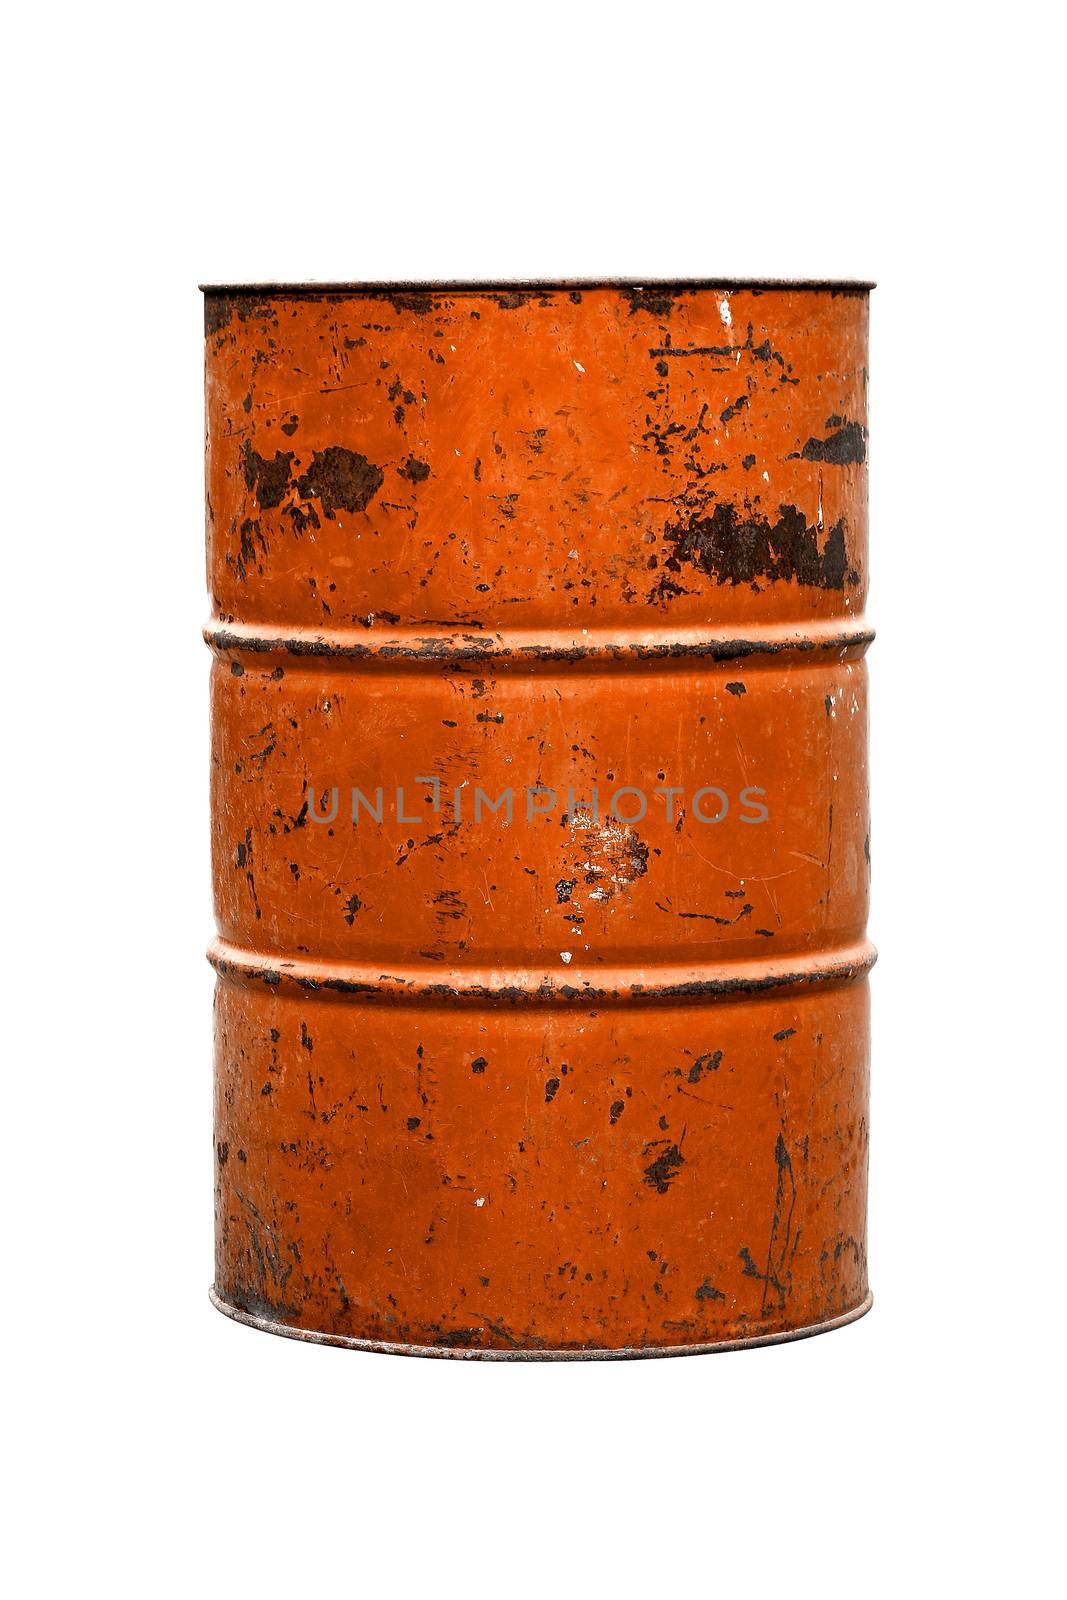 Barrel Oil orange Old isolated on background white by cgdeaw